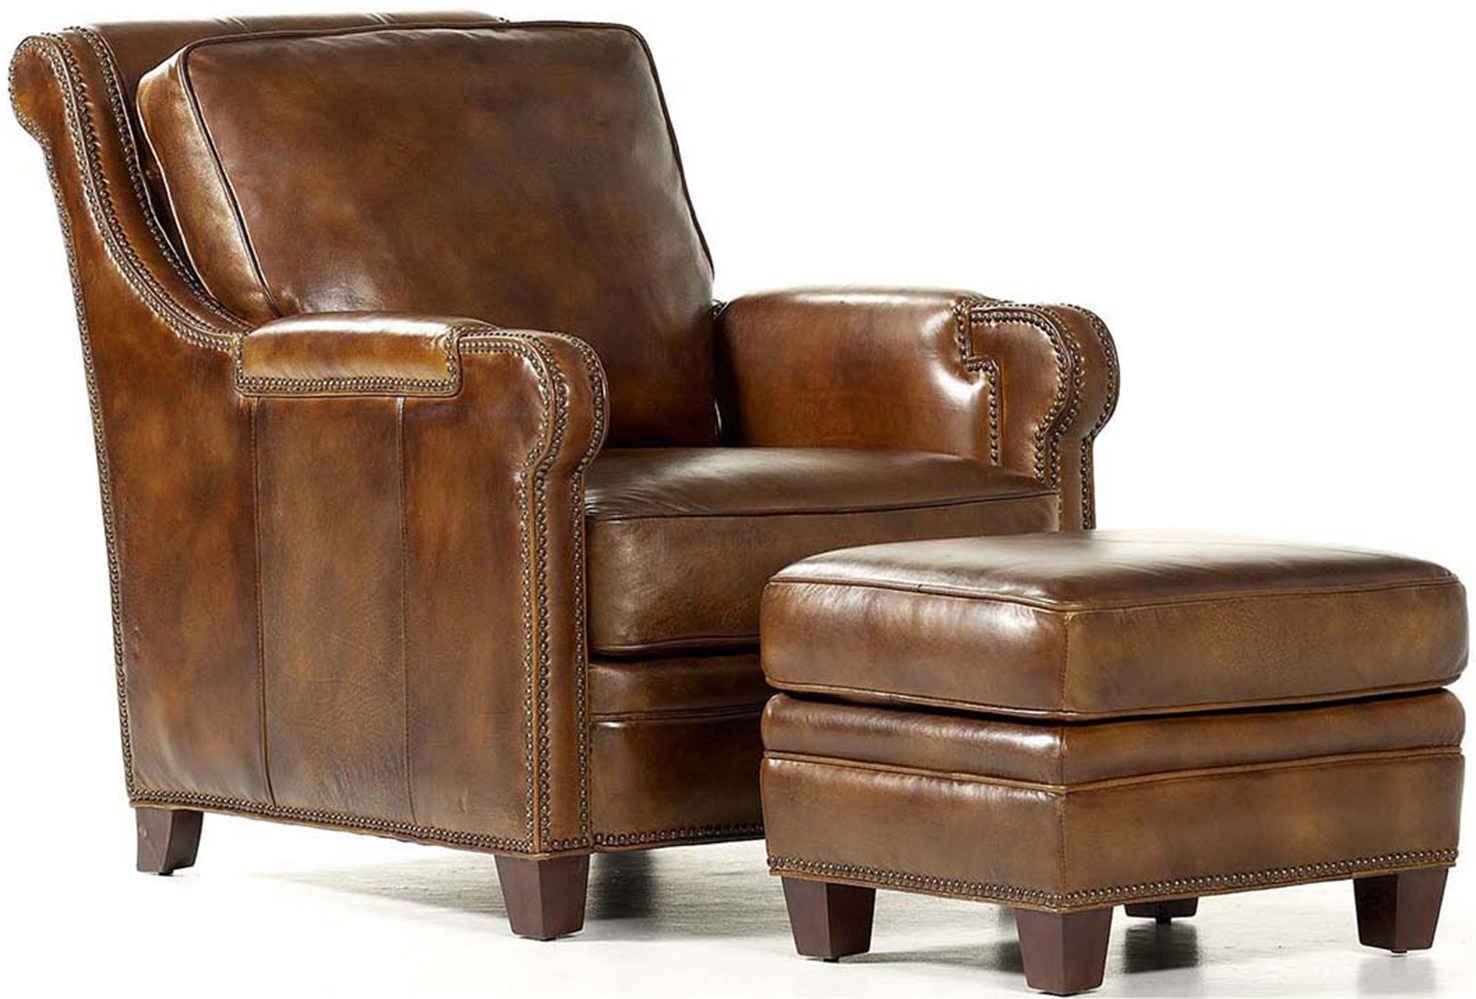 Luxury Leather & Upholstered Furniture Ashland Chair & Ottoman